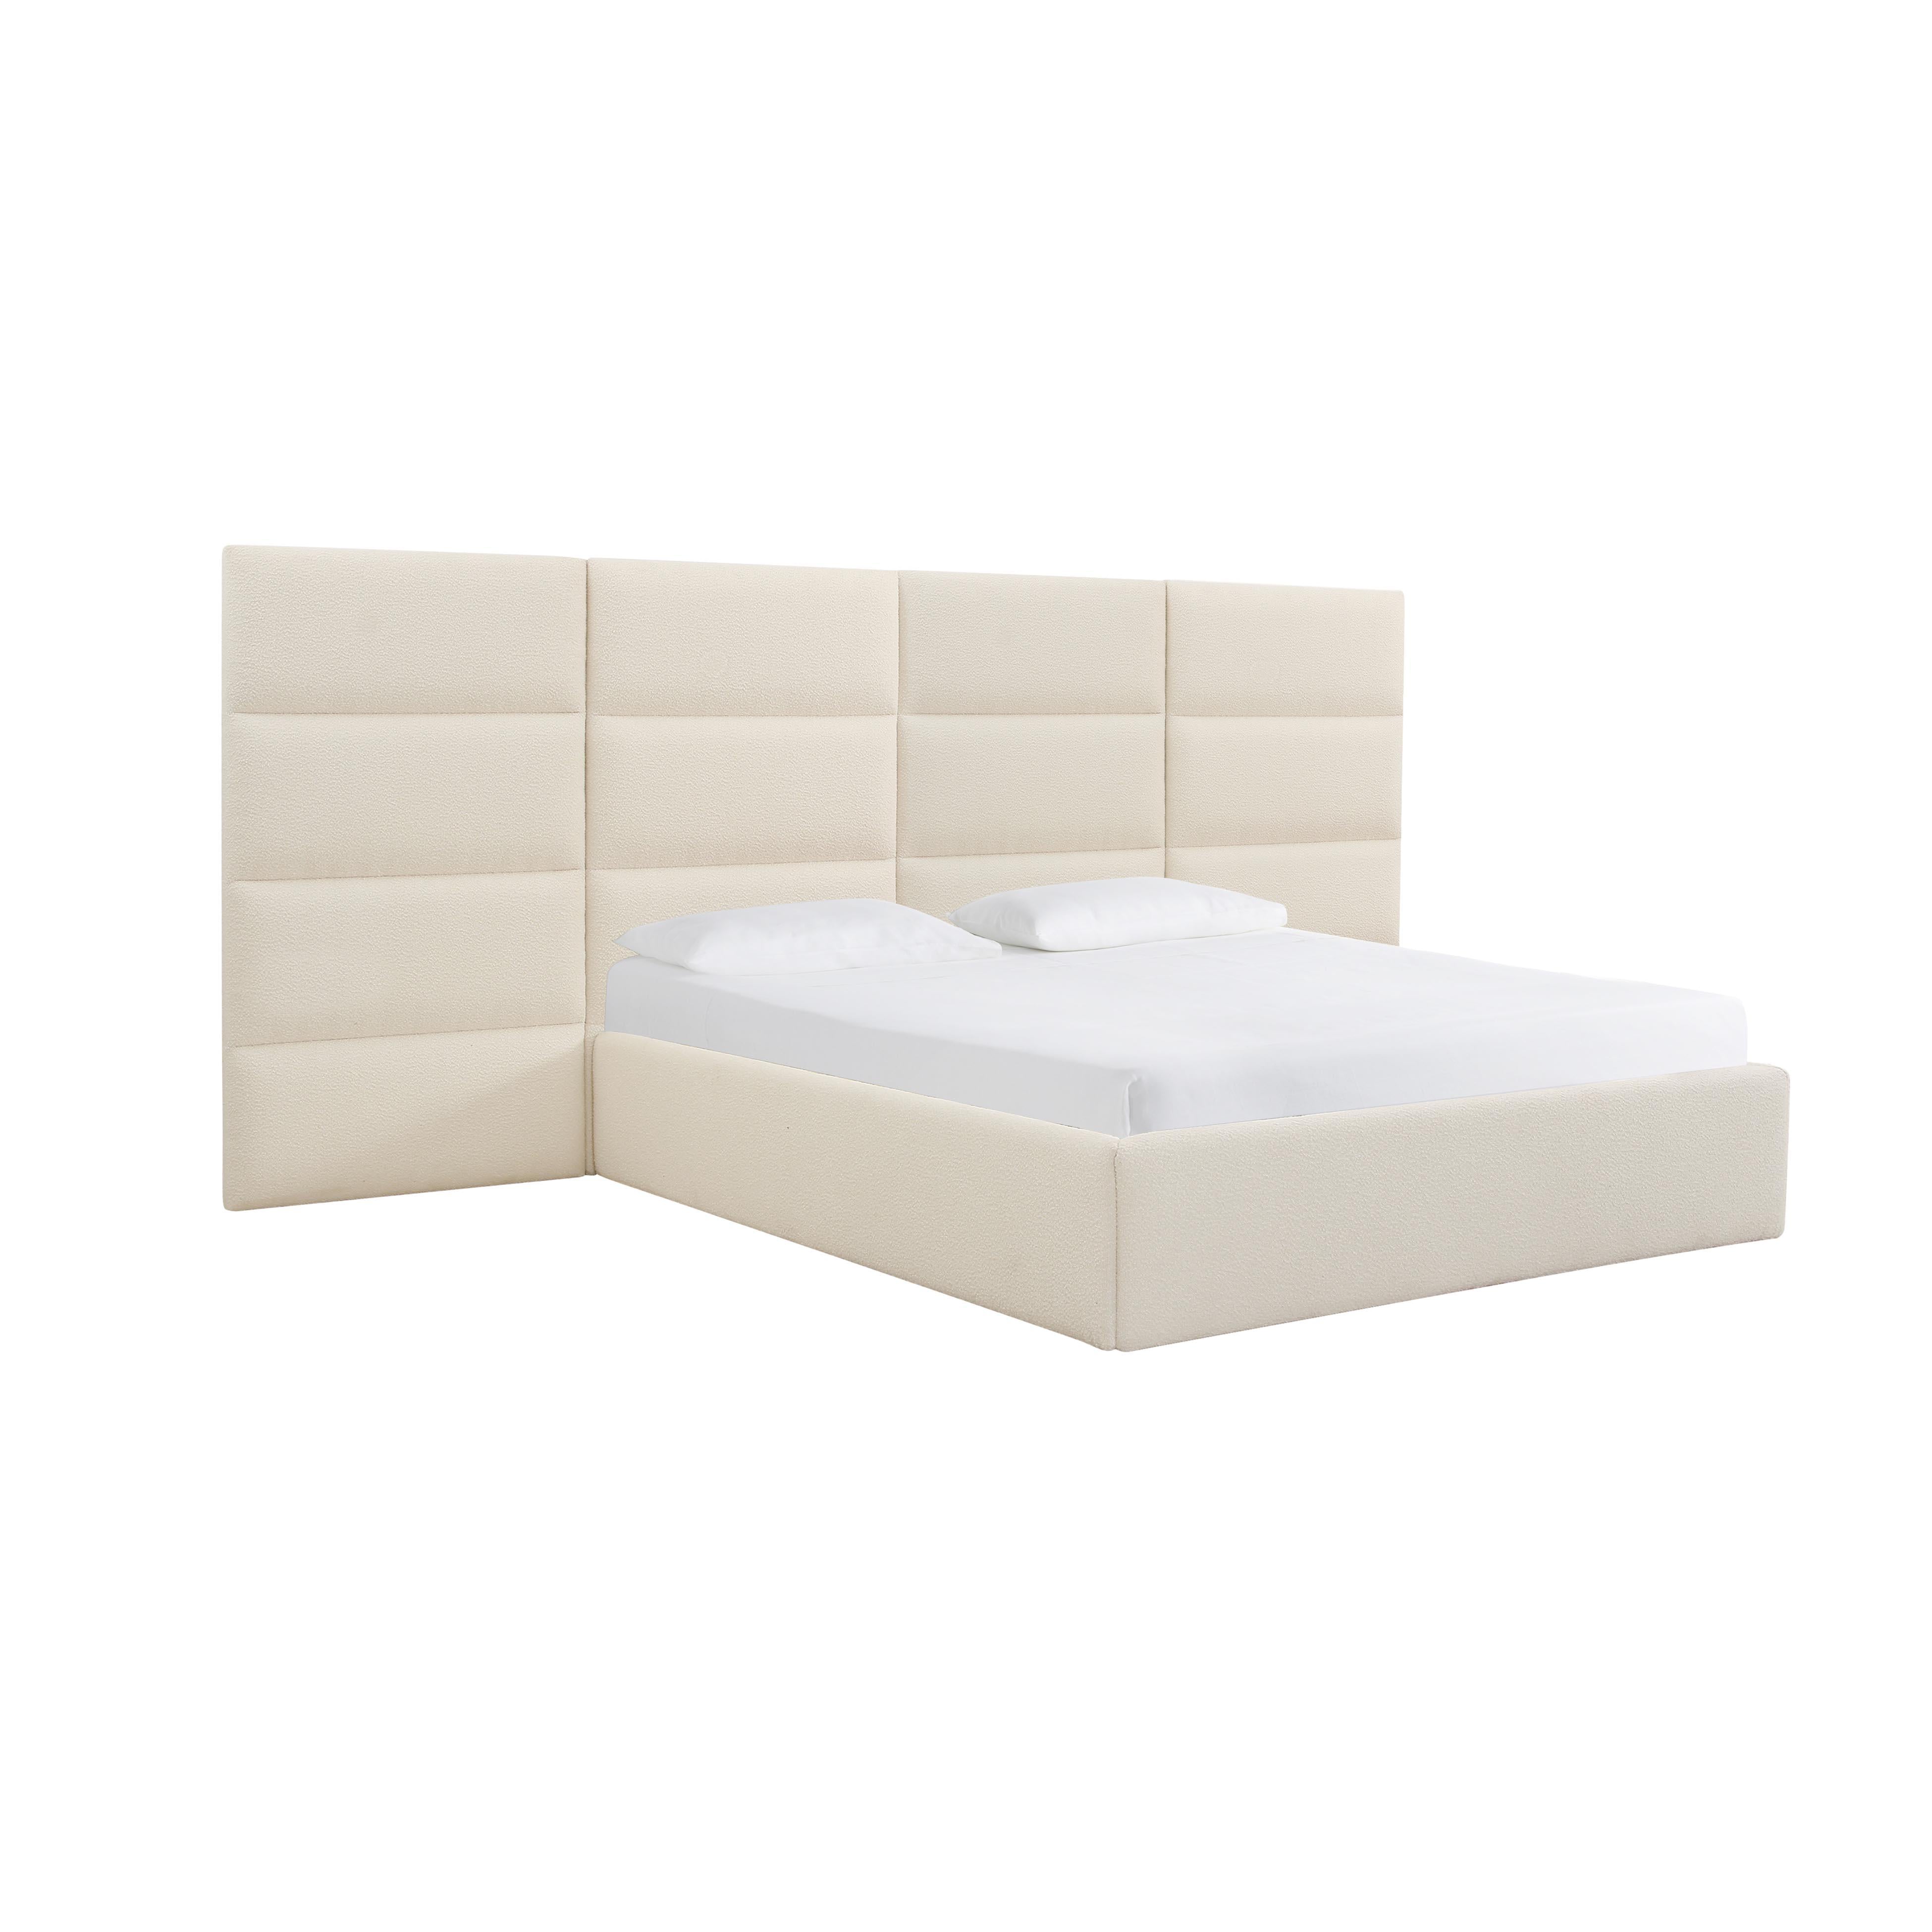 Tov Furniture Beds - Eliana Cream Boucle Queen Bed with Wings